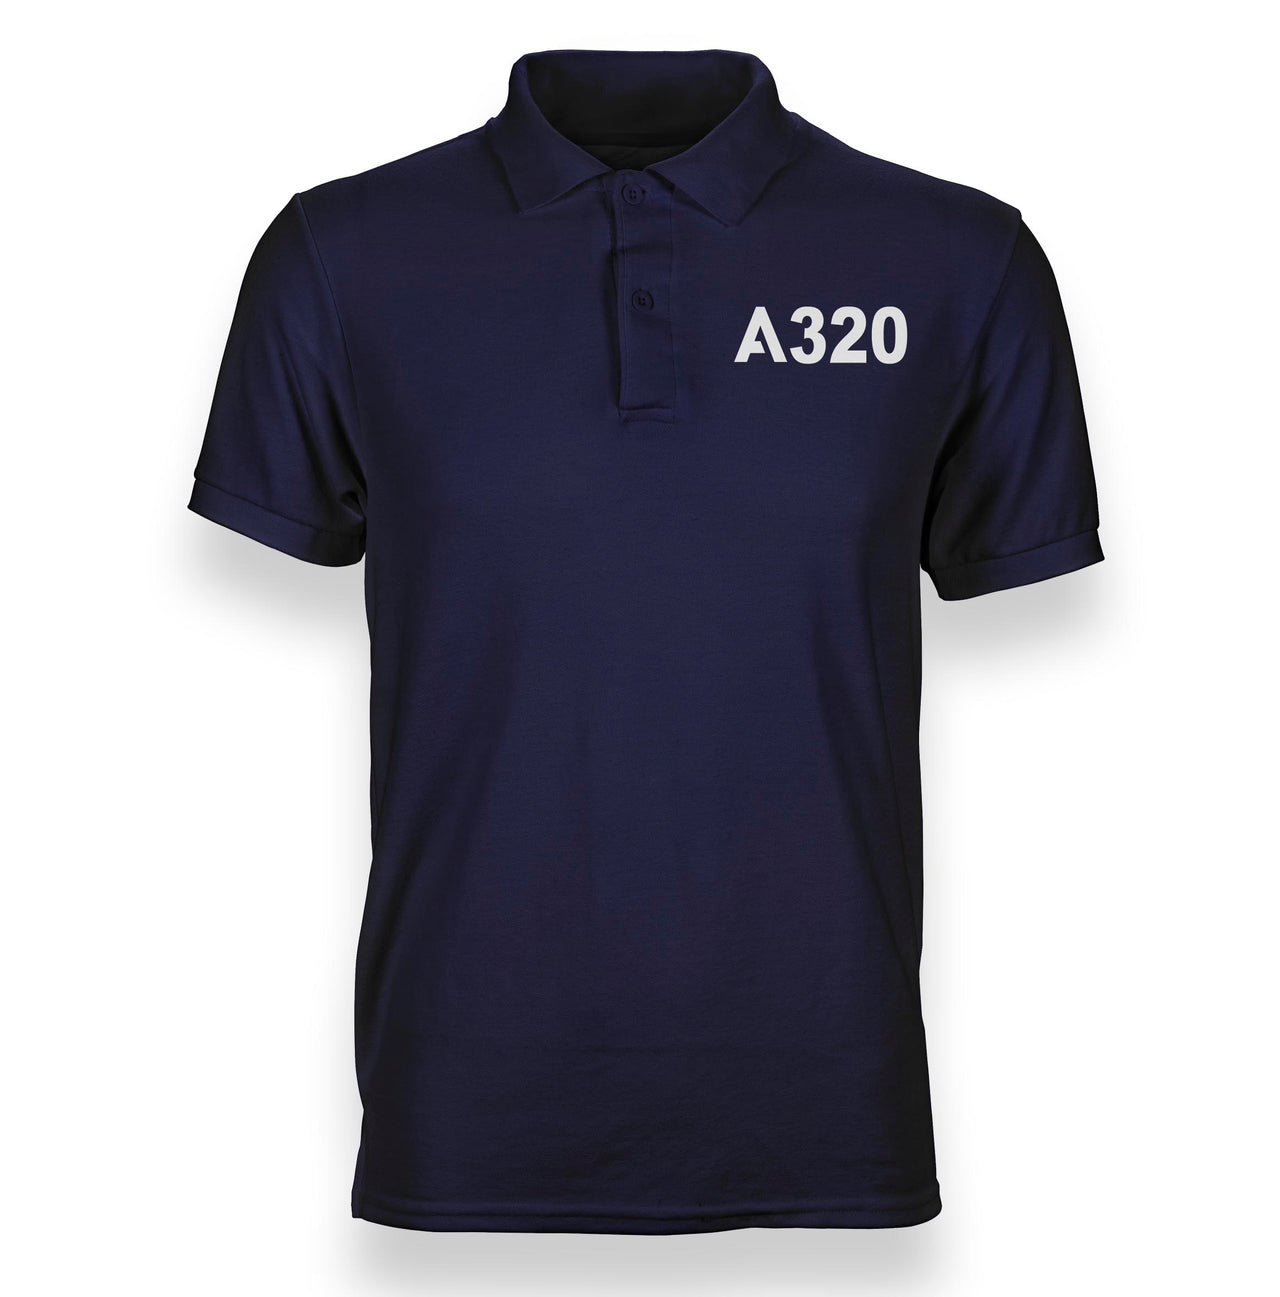 A320 Flat Text Designed Polo T-Shirts